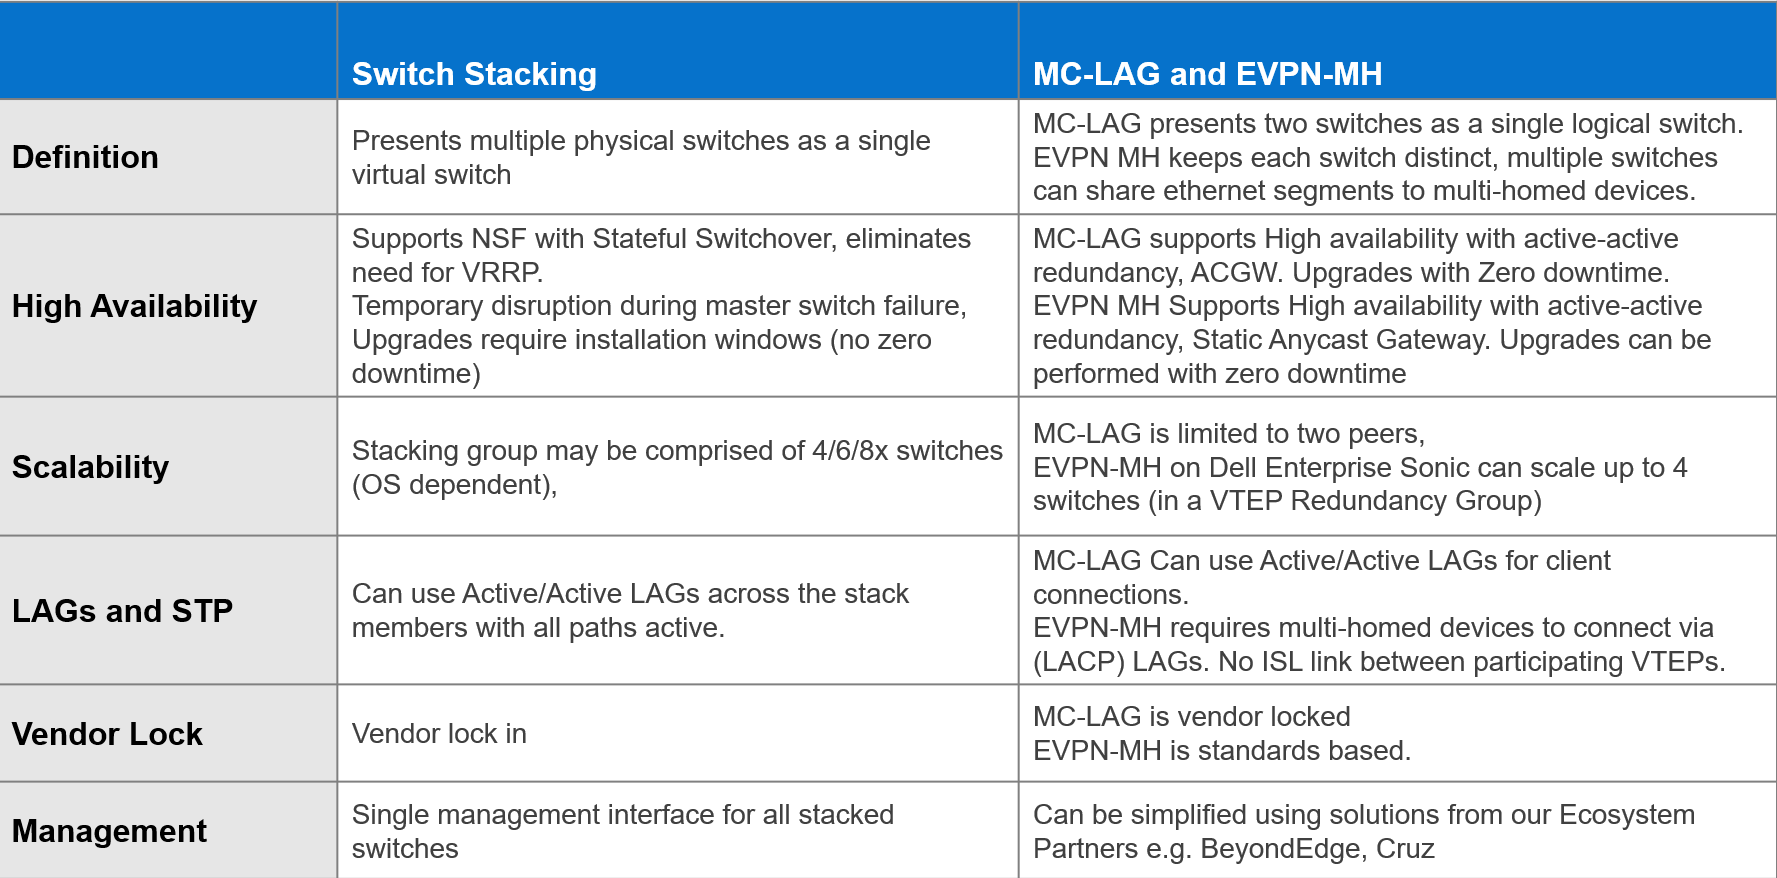 Table 1 provides information for switch stacking compared to MC-LAG and EVPN-MH